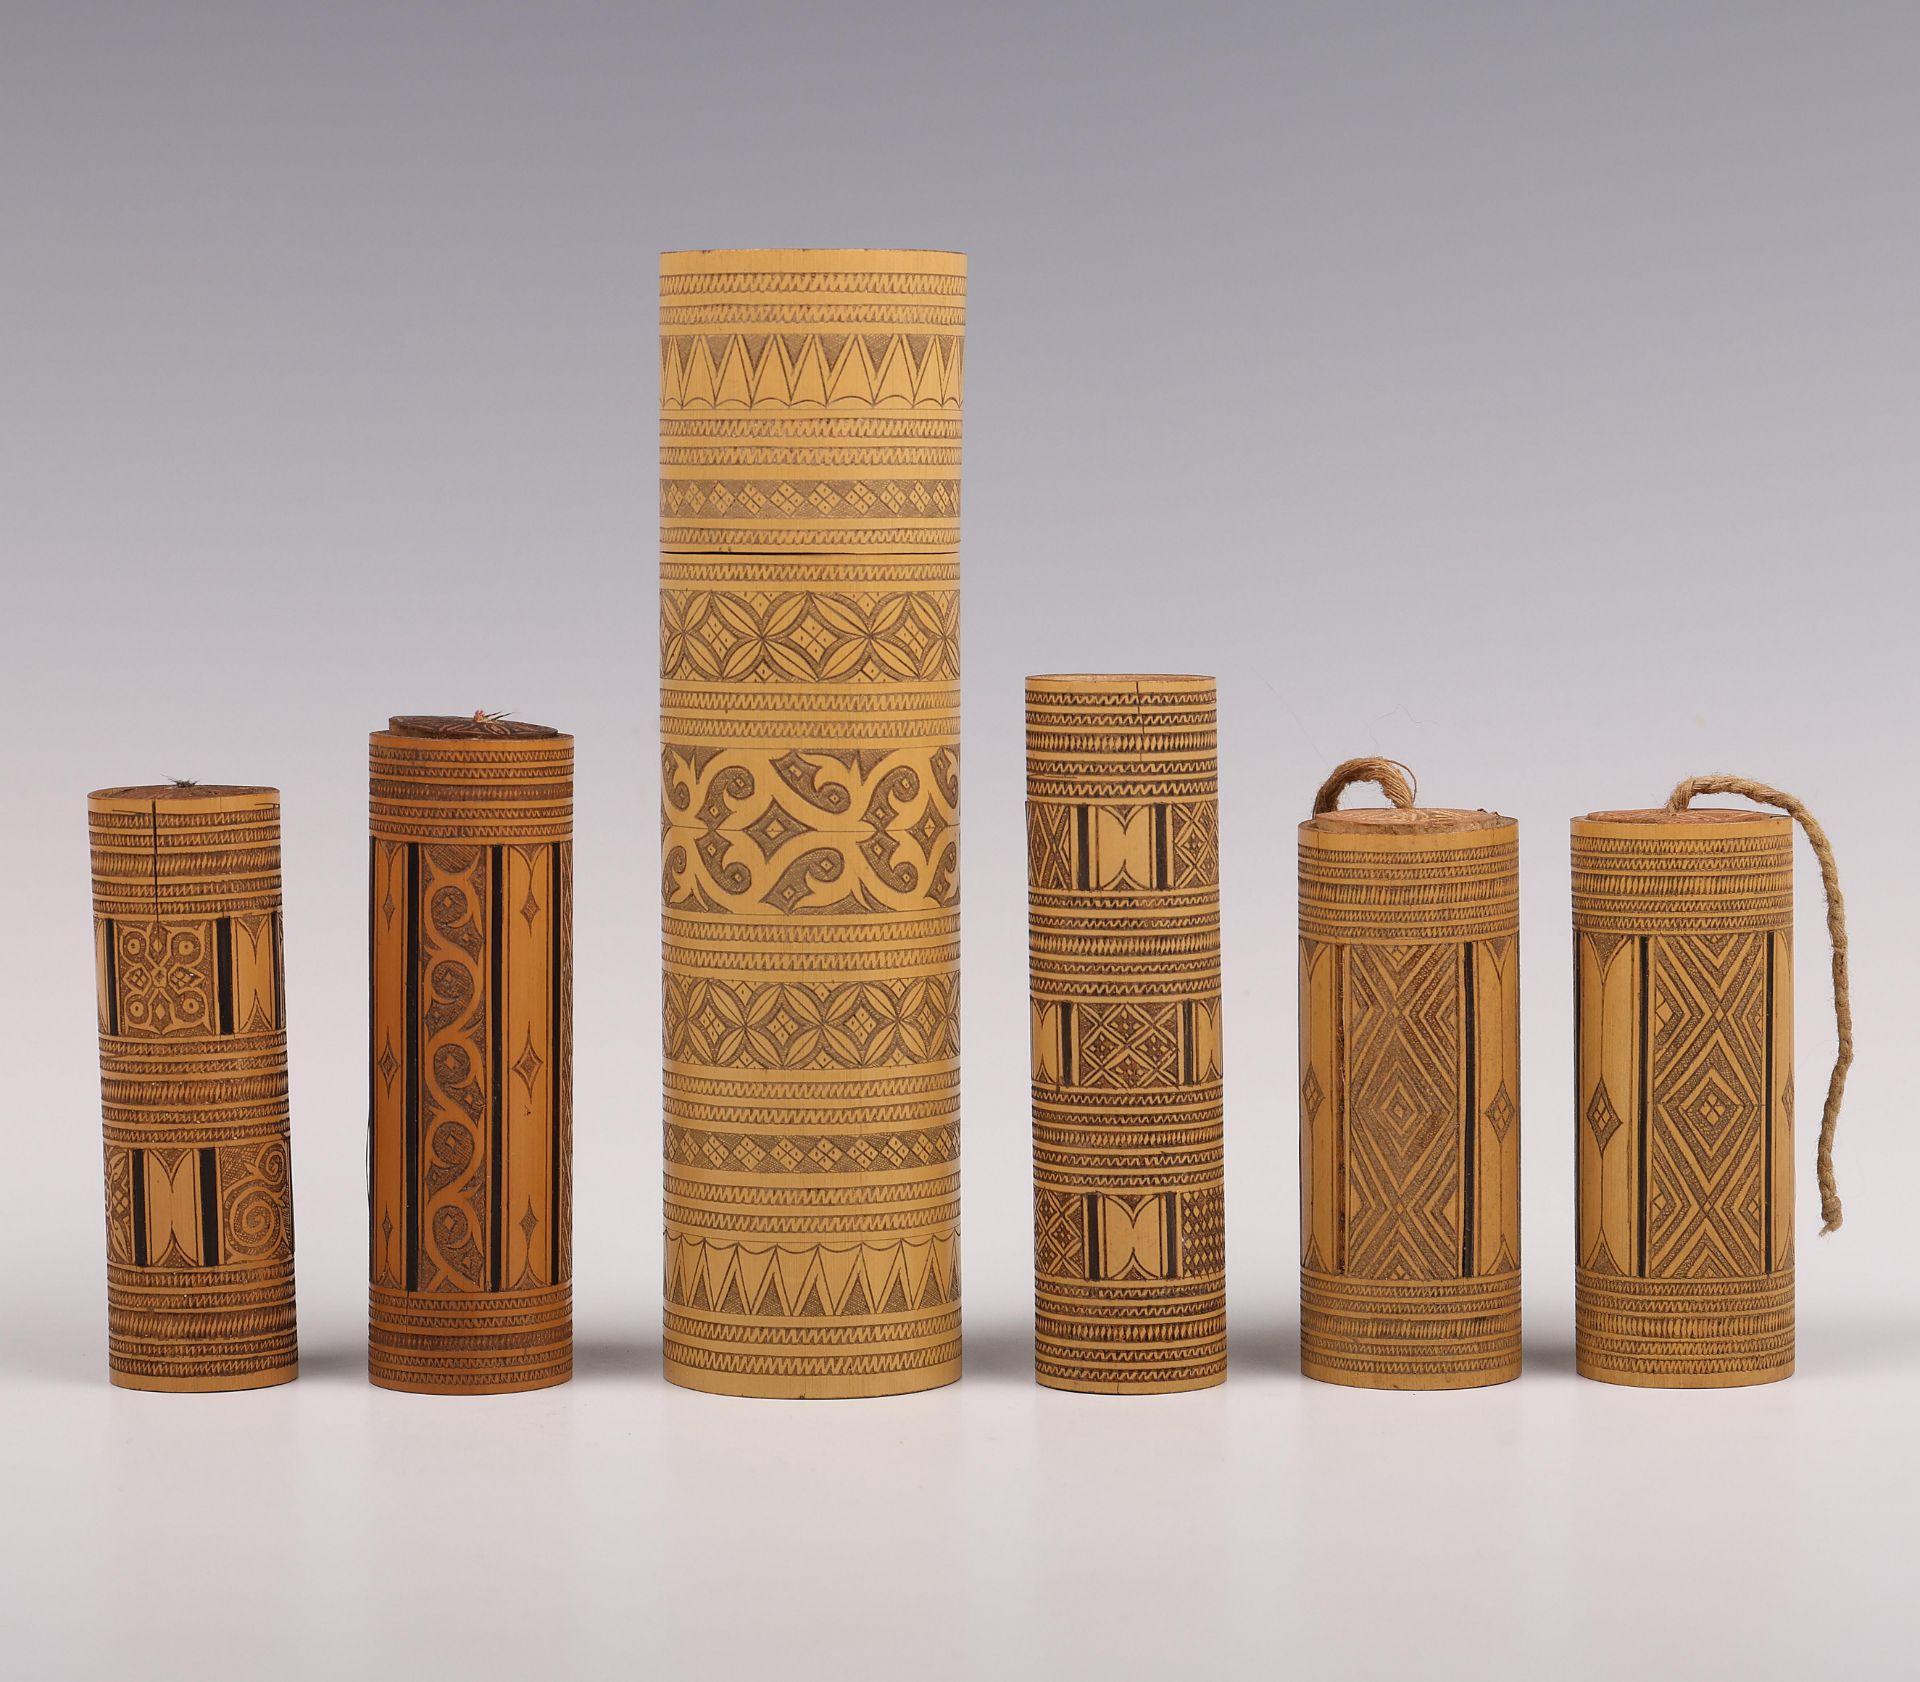 Sulawesi, Toraja, a collection of six bamboo lime containers